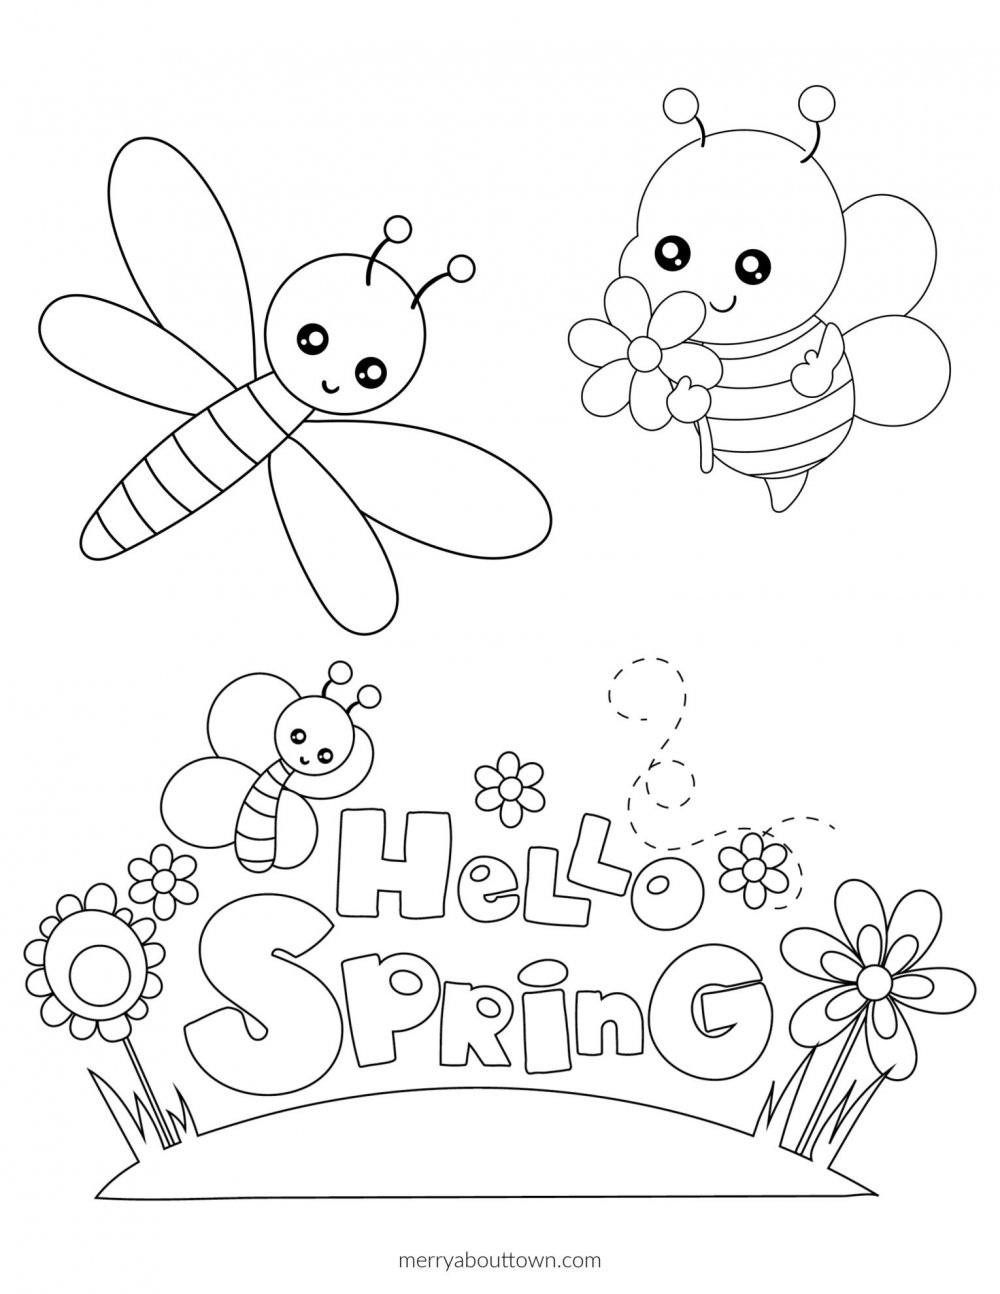 Free Printable Spring Coloring Sheets   Merry About Town